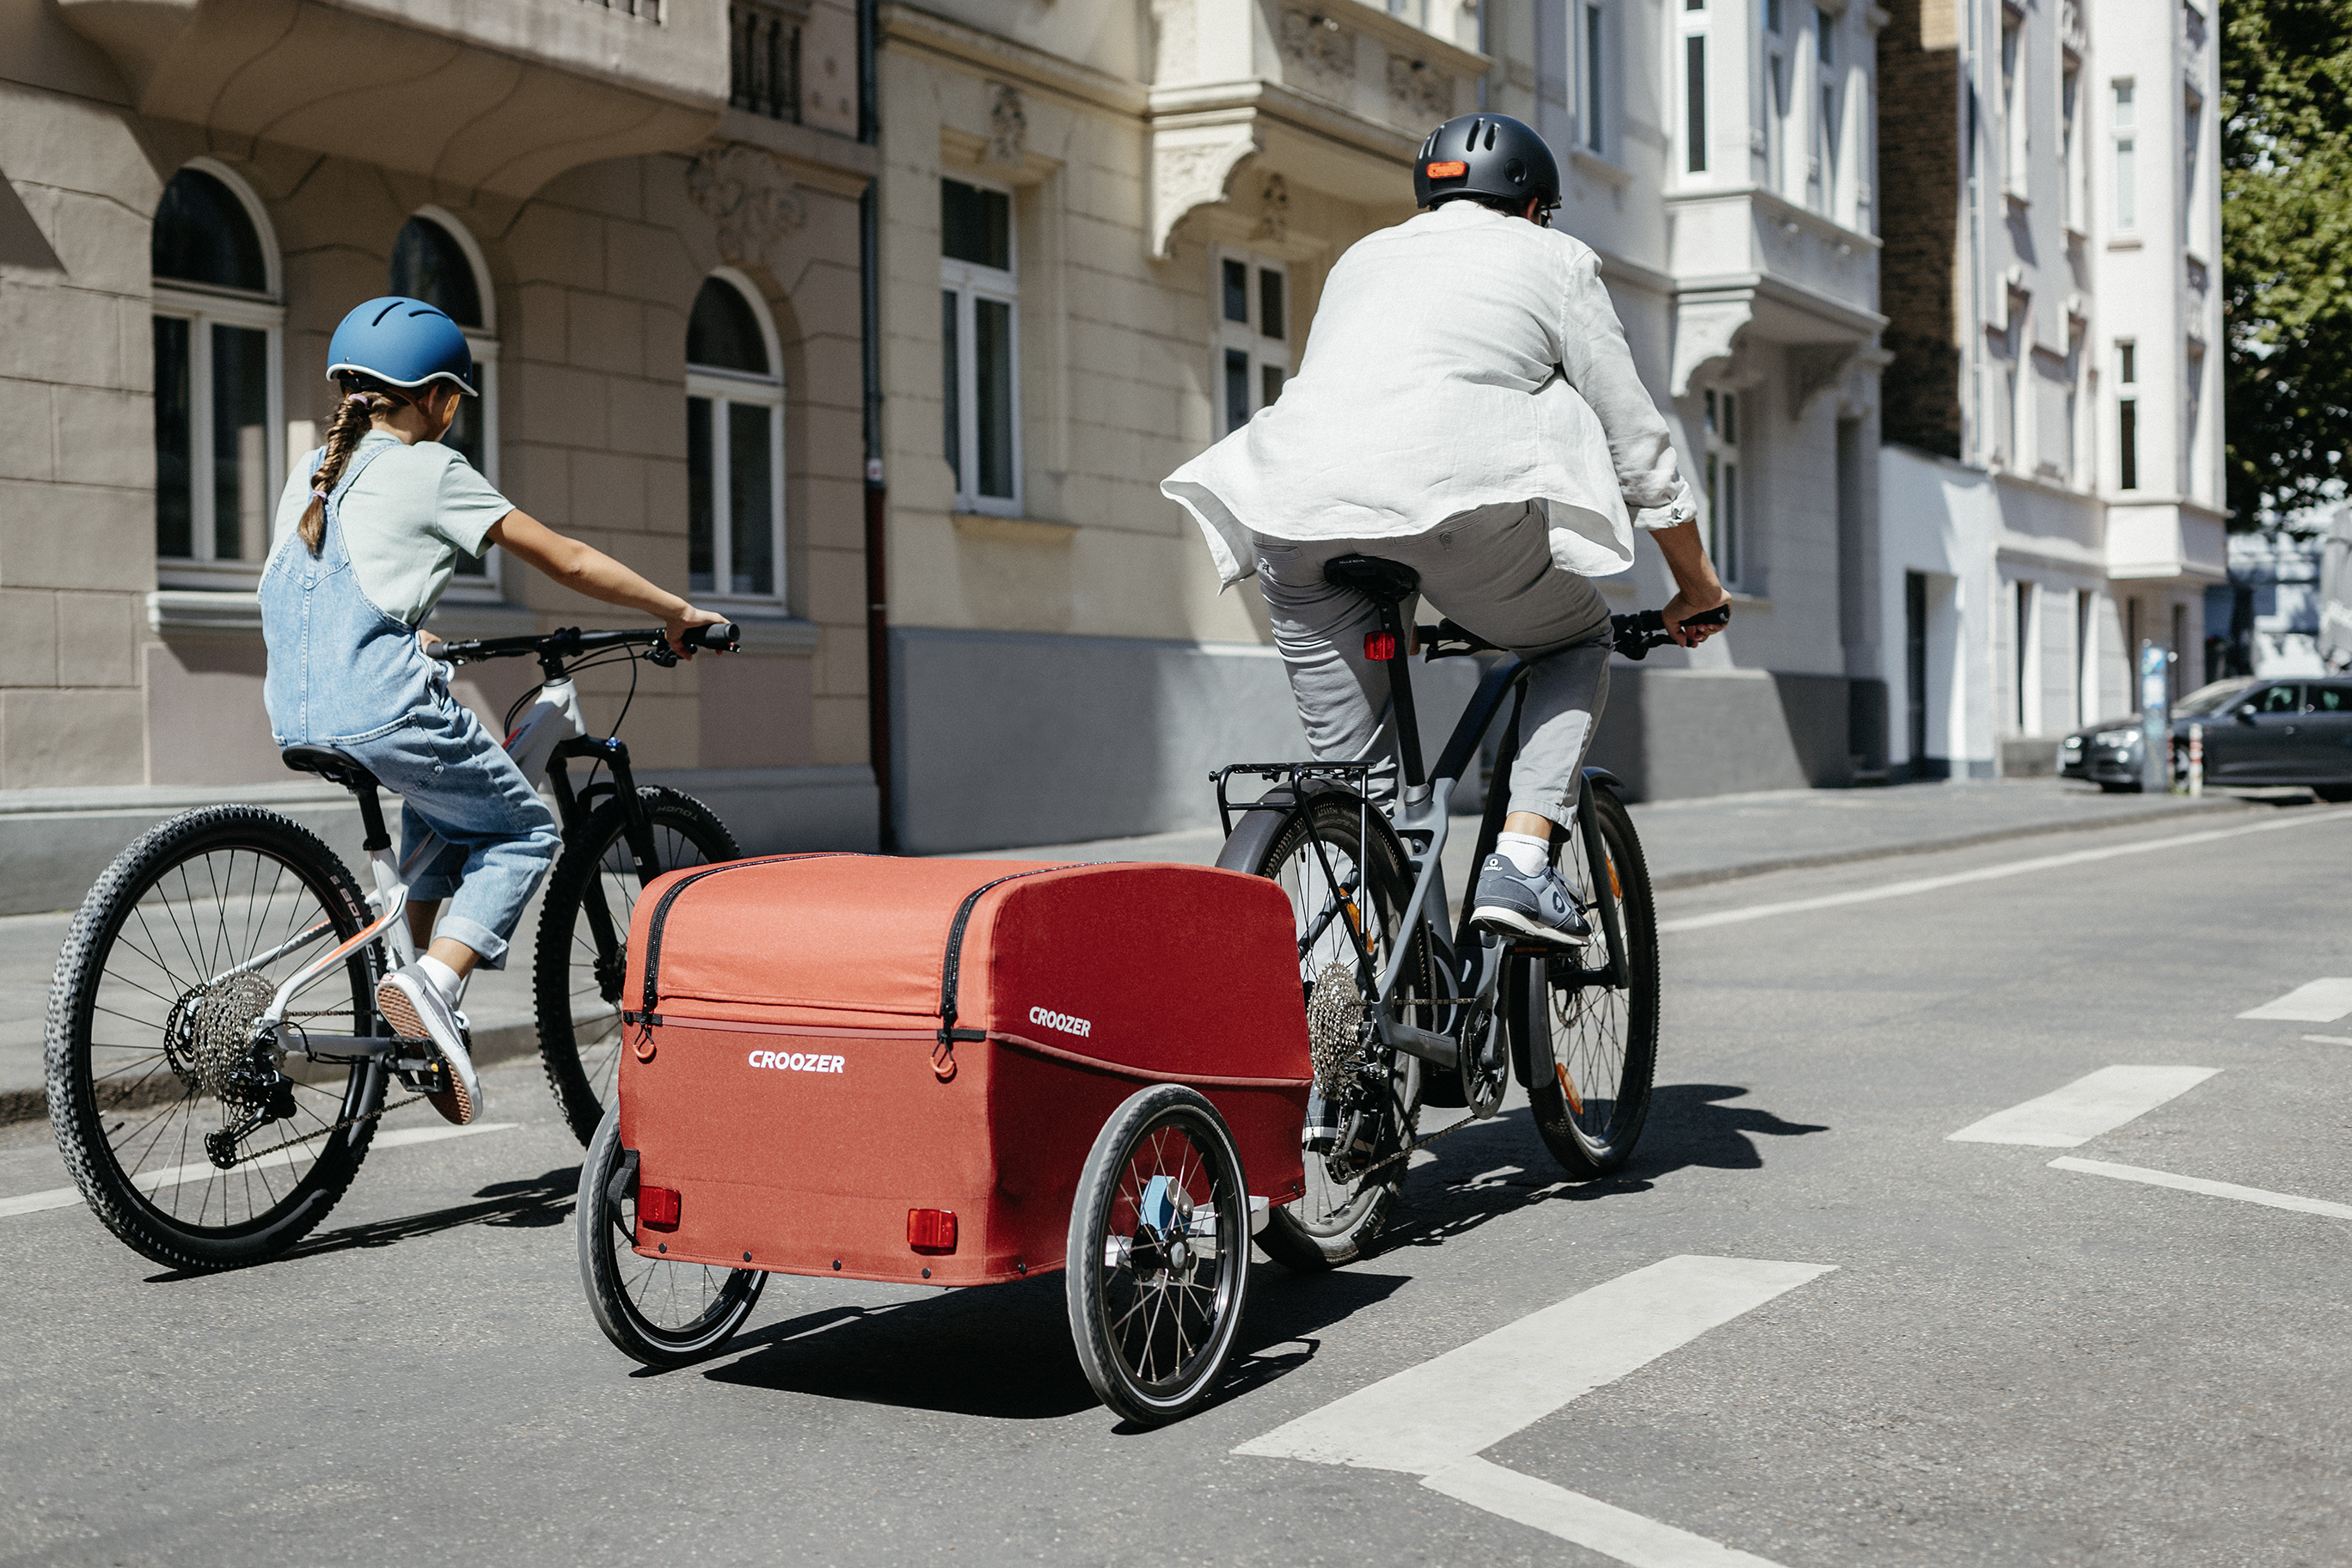 Bicycle trailers for up to 45 kg of cargo or luggage